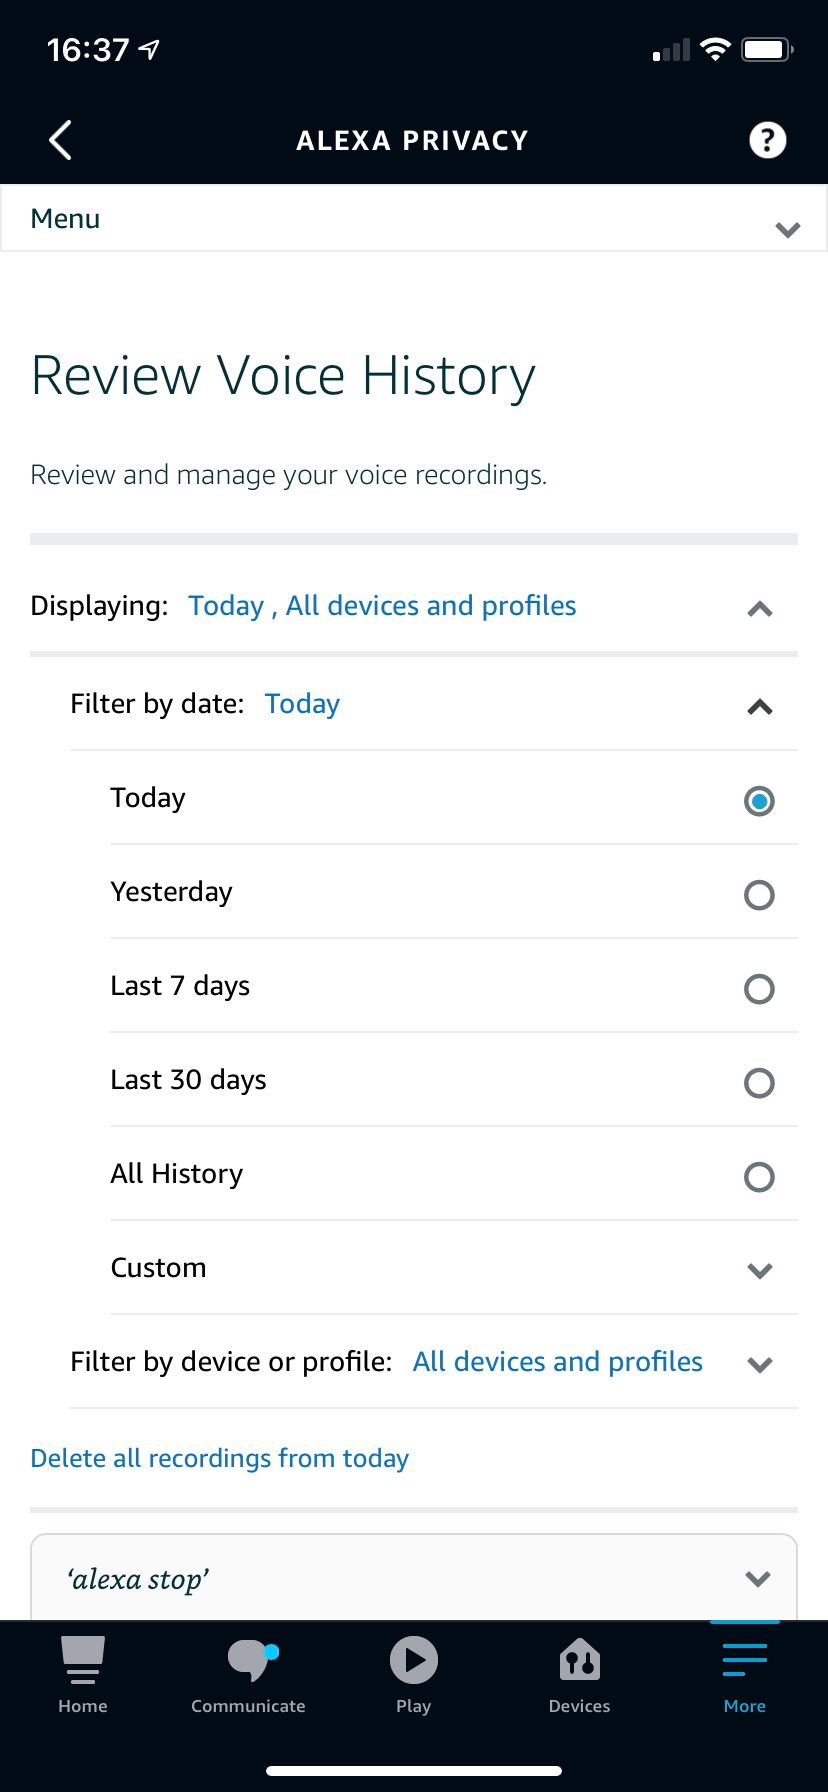 Alexa settings page for reviewing voice recordings